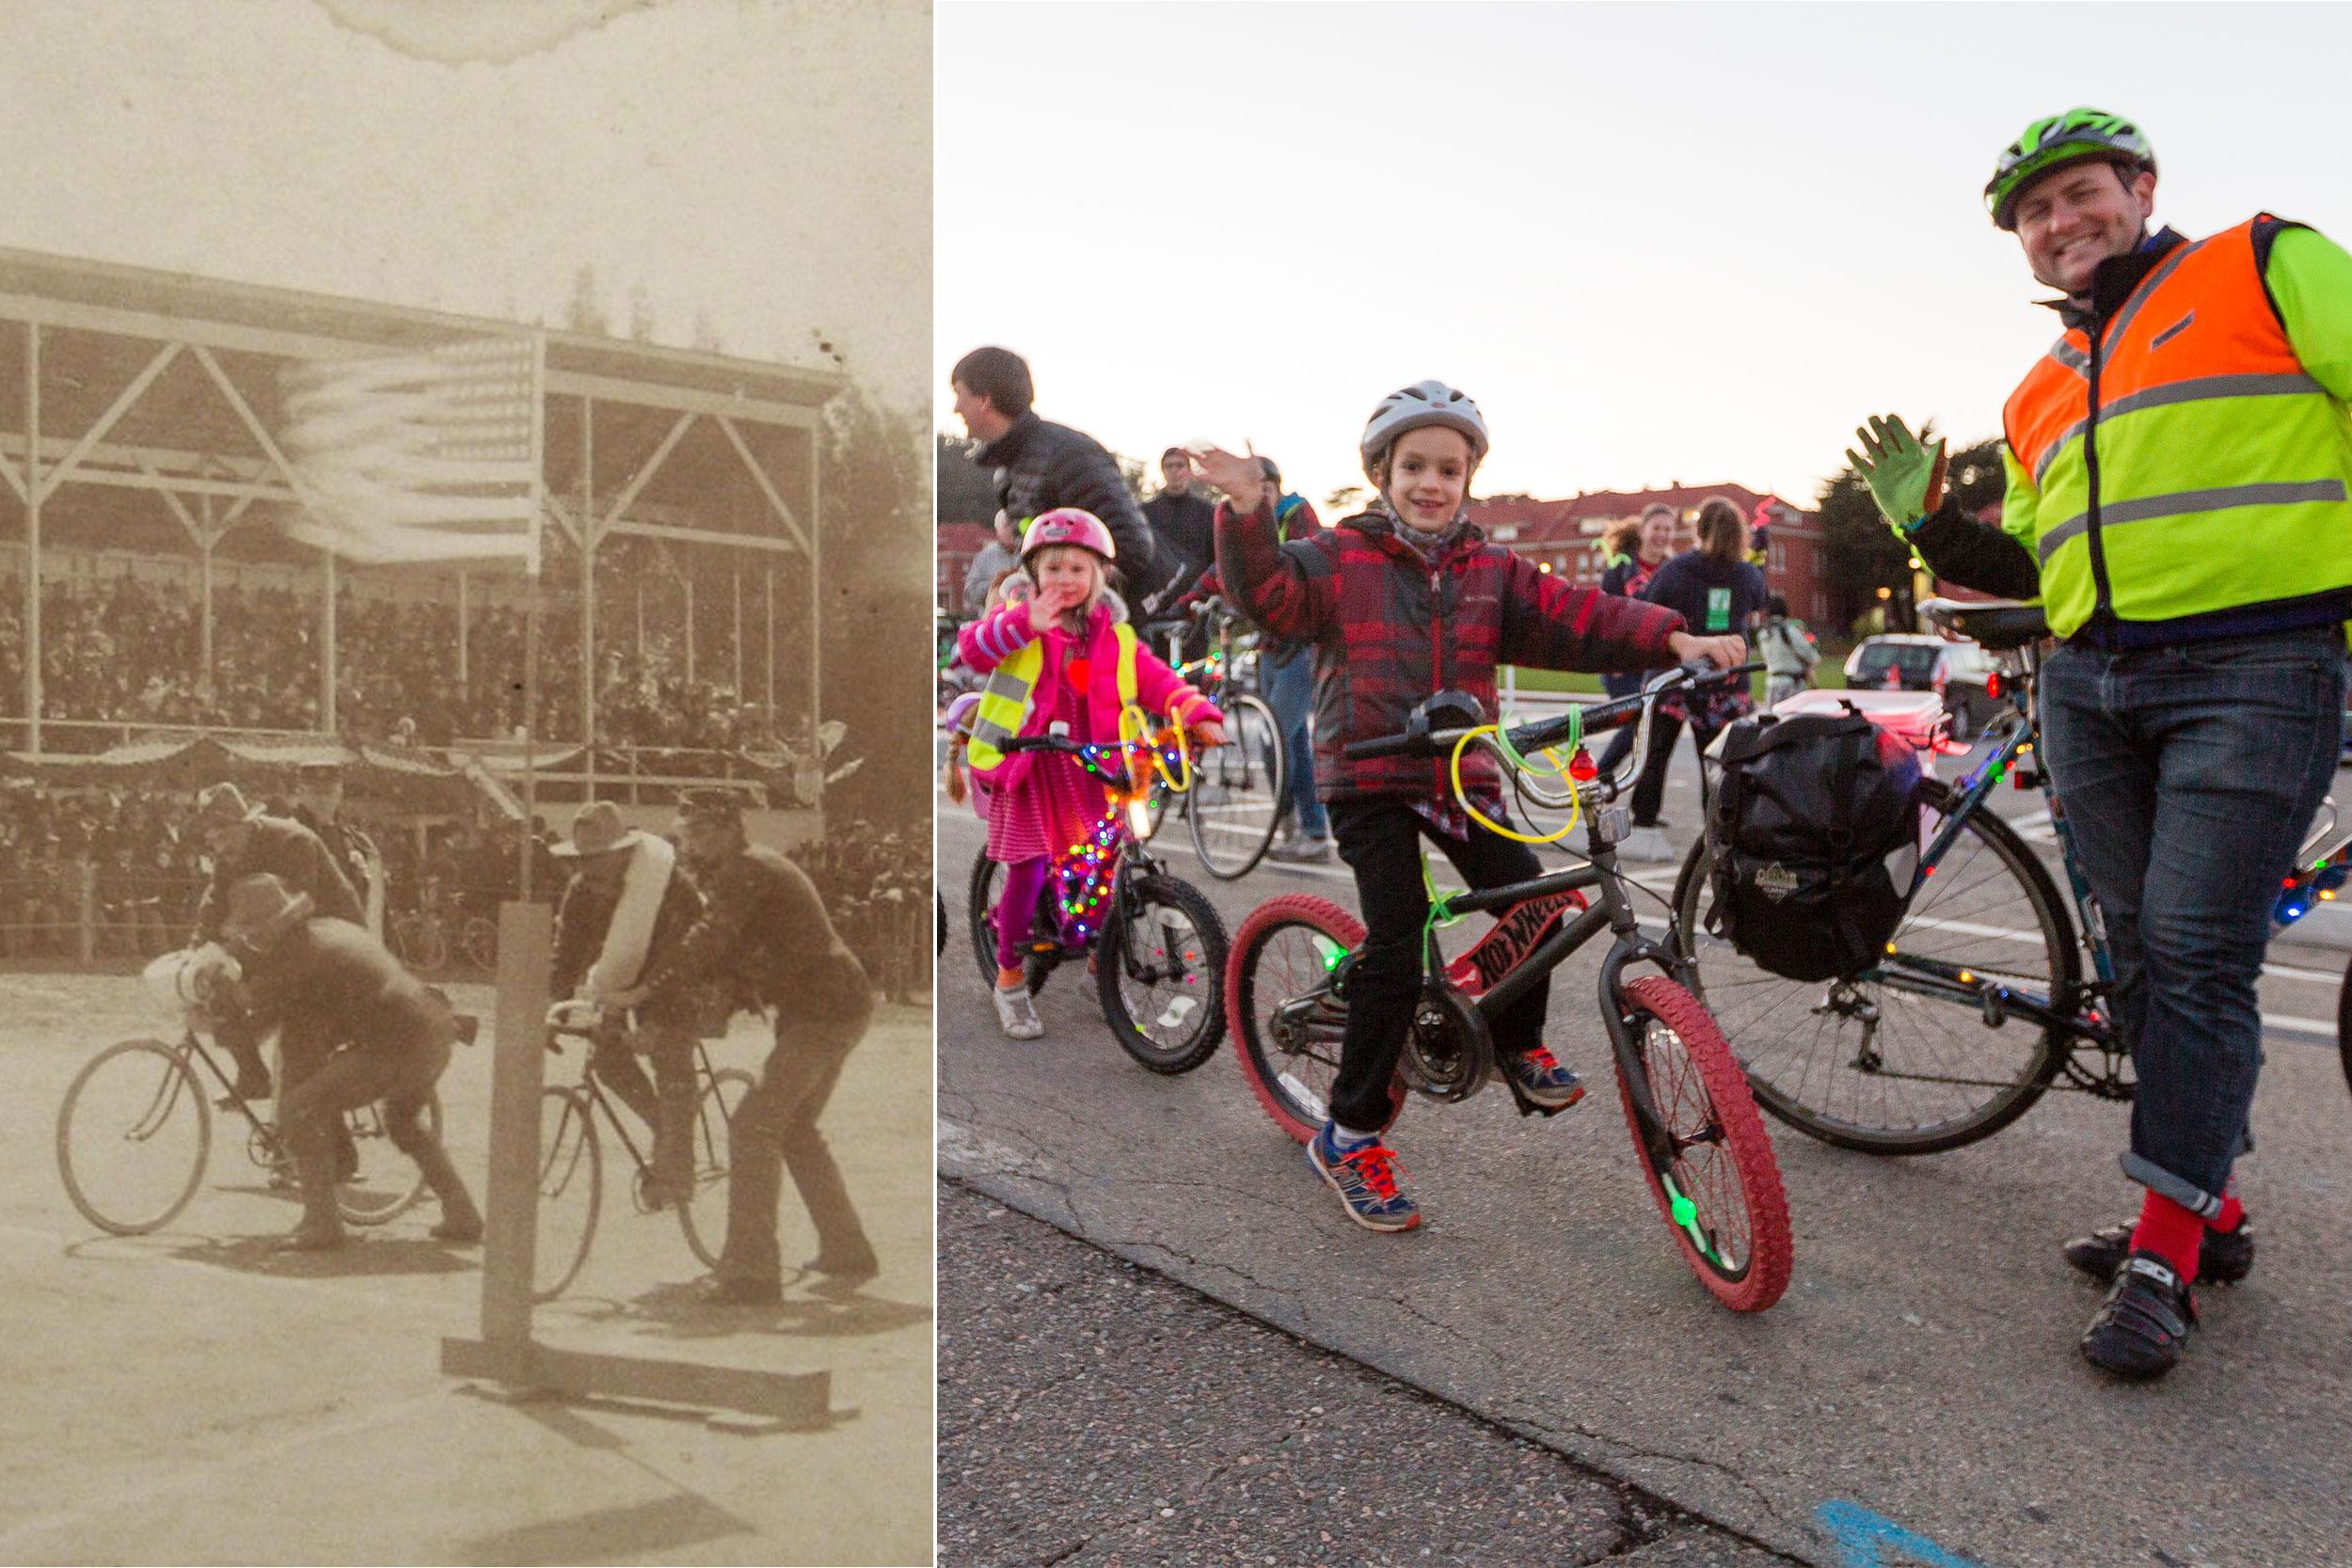 Biking in the Presidio then and now